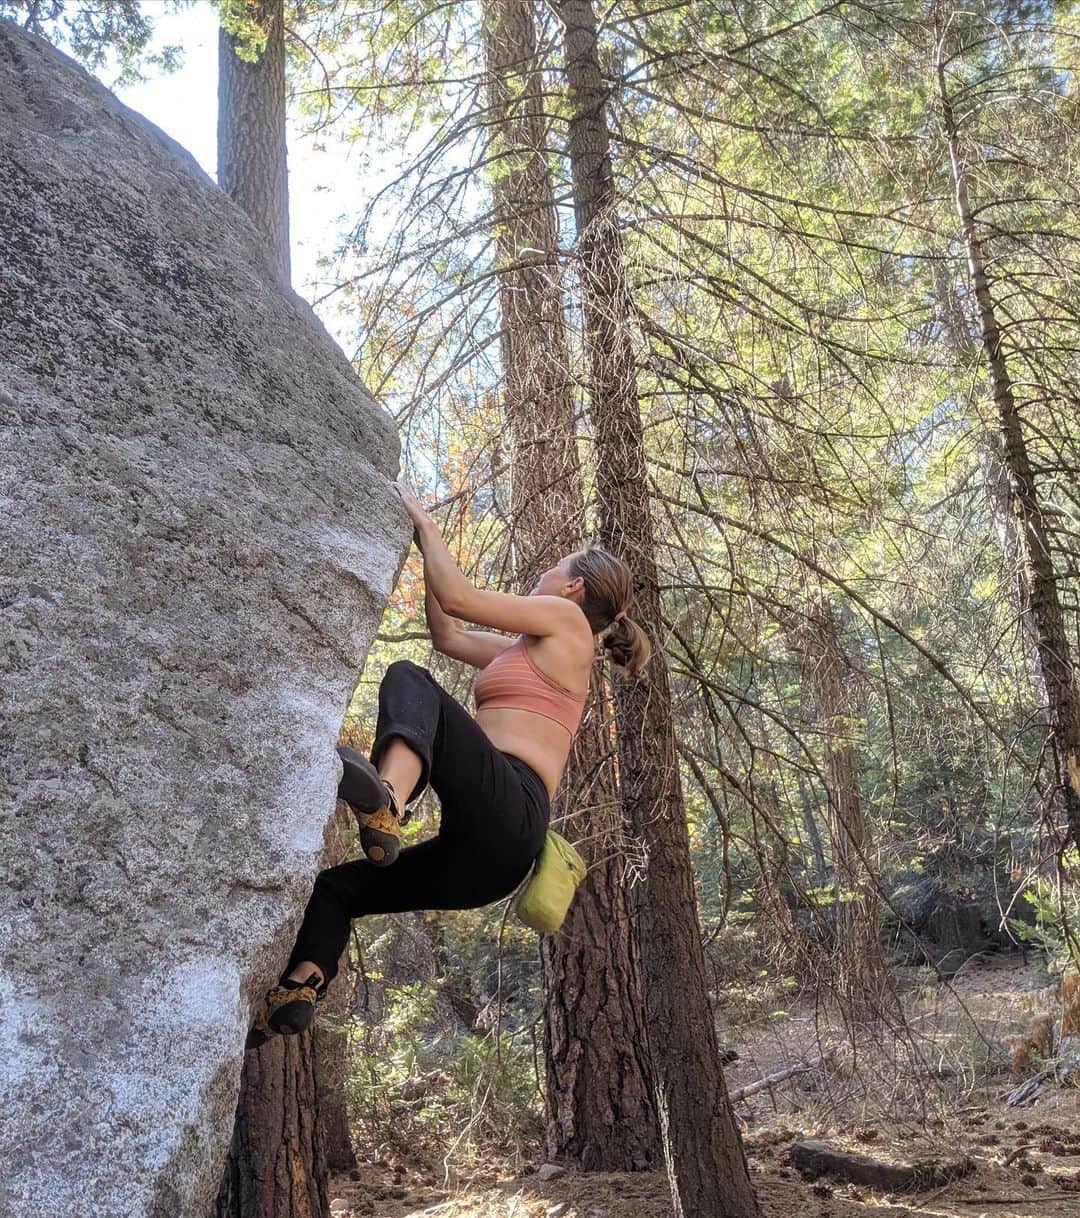 ベス・ロッデンのインスタグラム：「A few years ago I worked on an article for @outsidemagazine that was the first time I talked publicly about things that were vulnerable or shameful for me. But the thing I was scared of most was the photo shoot. I was two and a half years postpartum and at least fifteen pounds over my pre-pregnancy weight. I was embarrassed and ashamed that I hadn't been disciplined enough to get my body back. Even my "normal" friends had done so after a few months. My inner critic raged. I made a plan to go on one of those high fat fasting diets.  At checkout, Theo asked why I wasn't buying our favorite fruit. It took me by surprise, since it felt natural to manipulate my eating and body for performance and self worth. "Mom has to eat a certain way, for my work, to make me feel good..." As I was trailing on I could see the perplexity in his face. I stopped my little sermon and realized I was planting a dangerous seed. I grabbed fruit and checked out without the diet food. I suppose I could have just done the diet on my own, but I knew that wasn't the transformation that needed to happen.  I never lost that weight before the photoshoot. It was winter and I wore a down jacket and could hide my body. I felt relief in that. Looking back, I wasn't ready anyways. That took another few years of changing my own inner dialogue and feeling worthy outside of a skinny body and sending a hard route. But taking small steps have all led to the greatest transformation in my life and career.  Thanks everyone for the kind words and posting your own stories around these topics over the past few weeks. It’s been the change we all want to see. Amazing what some self love can do ❤️ Pics: Climbing in Yosemite this fall and the @outsidemagazine photo shoot by @trittscamera 🙏  @outdoorresearch @metoliusclimbing @touchstoneclimbing @bluewaterropes @ospreypacks @skinourishment @clifbar @lasportivana #orambassador」